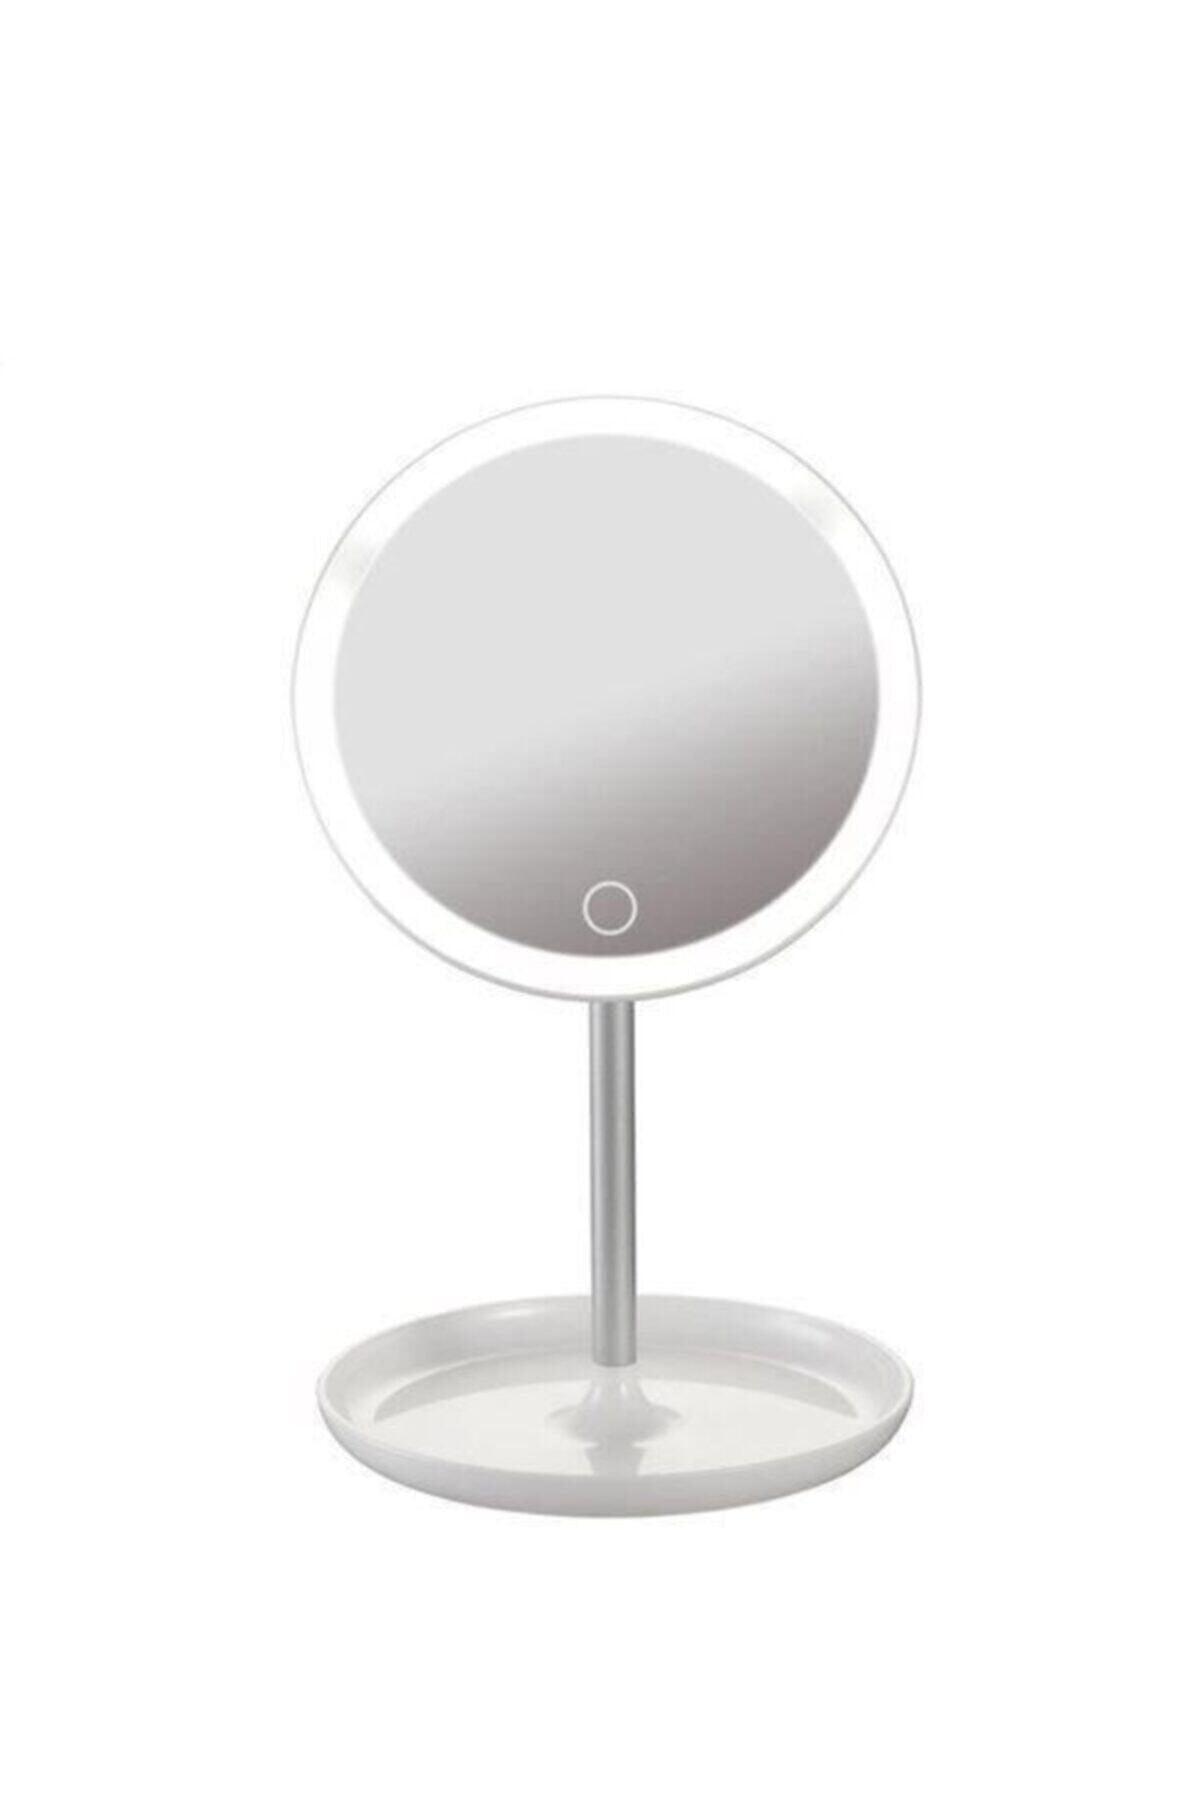 Touch Led Illuminated Usb Li Round Table Top Makeup Mirror Vanity Mirror With Led - Swordslife